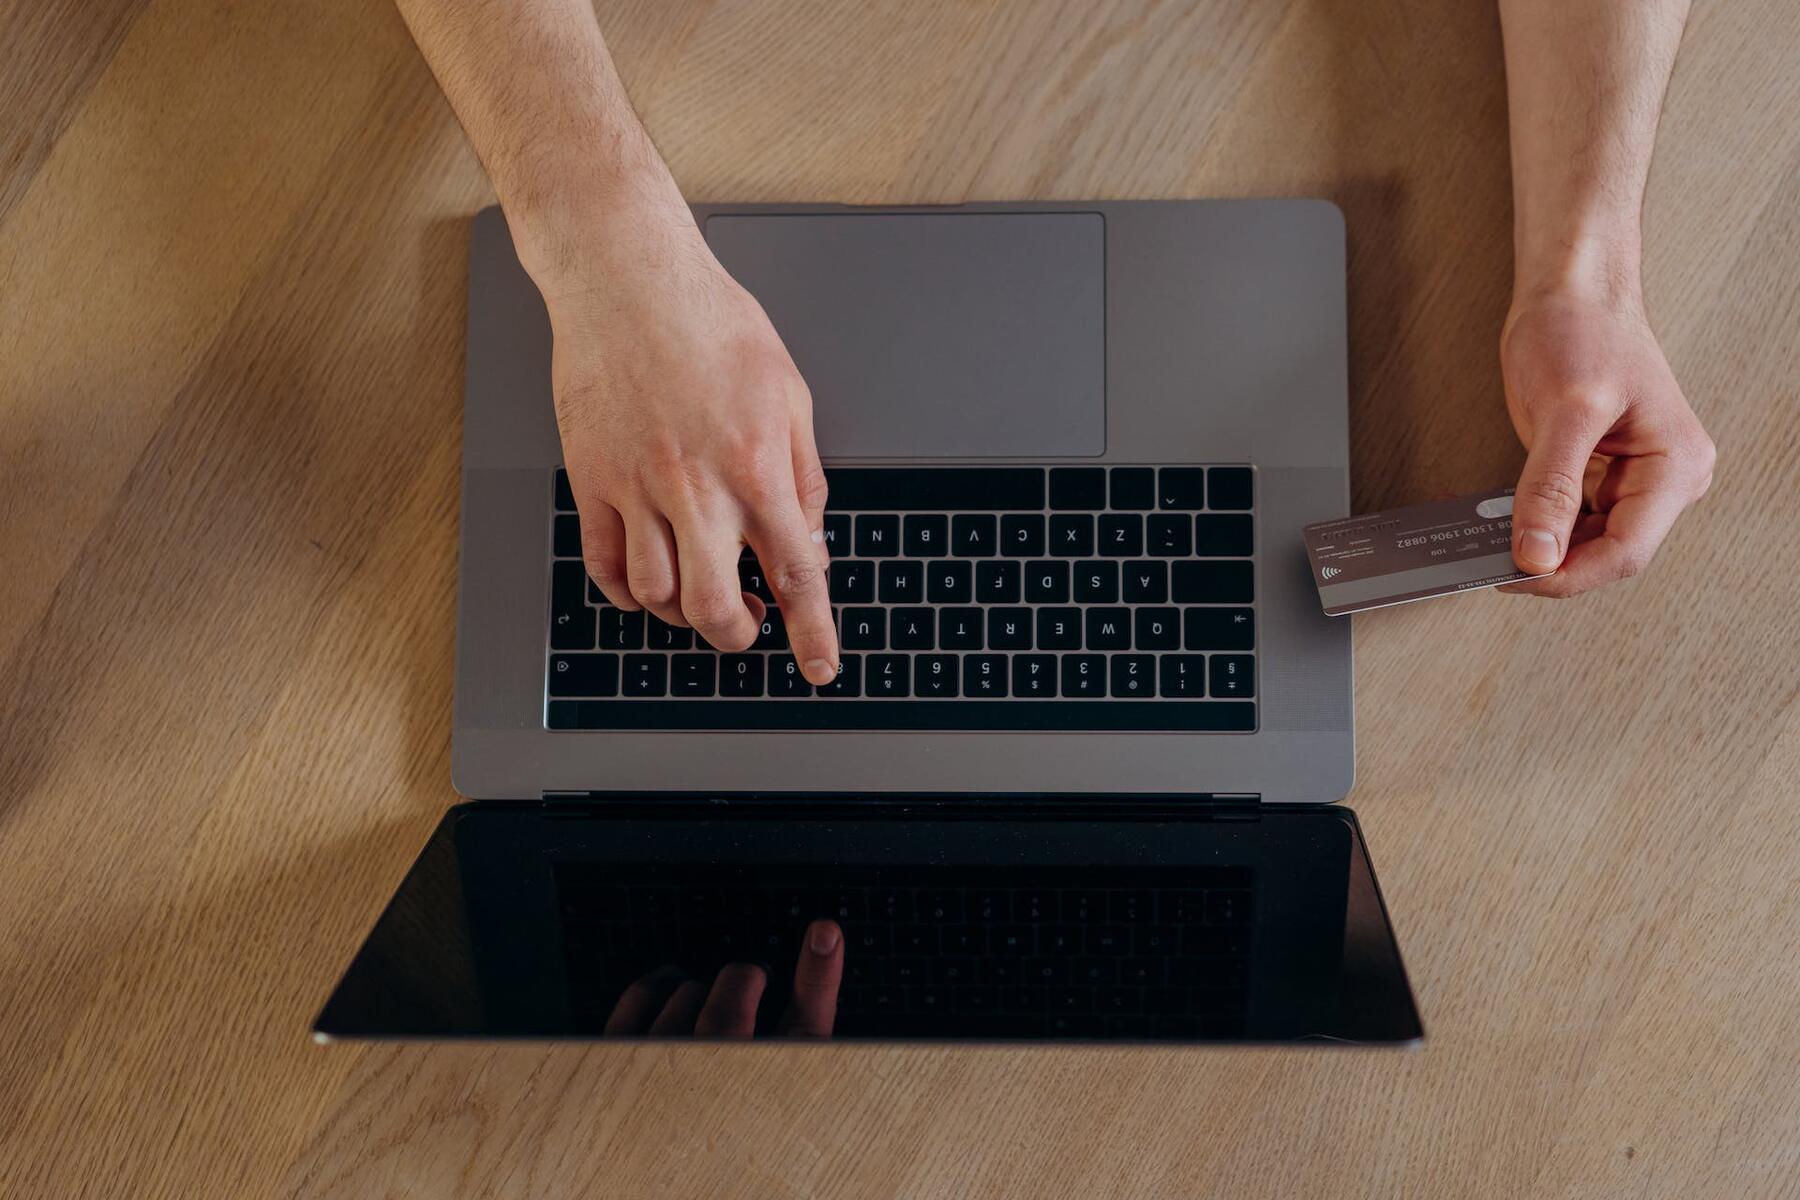 A man's hands holding a credit card and typing on a laptop